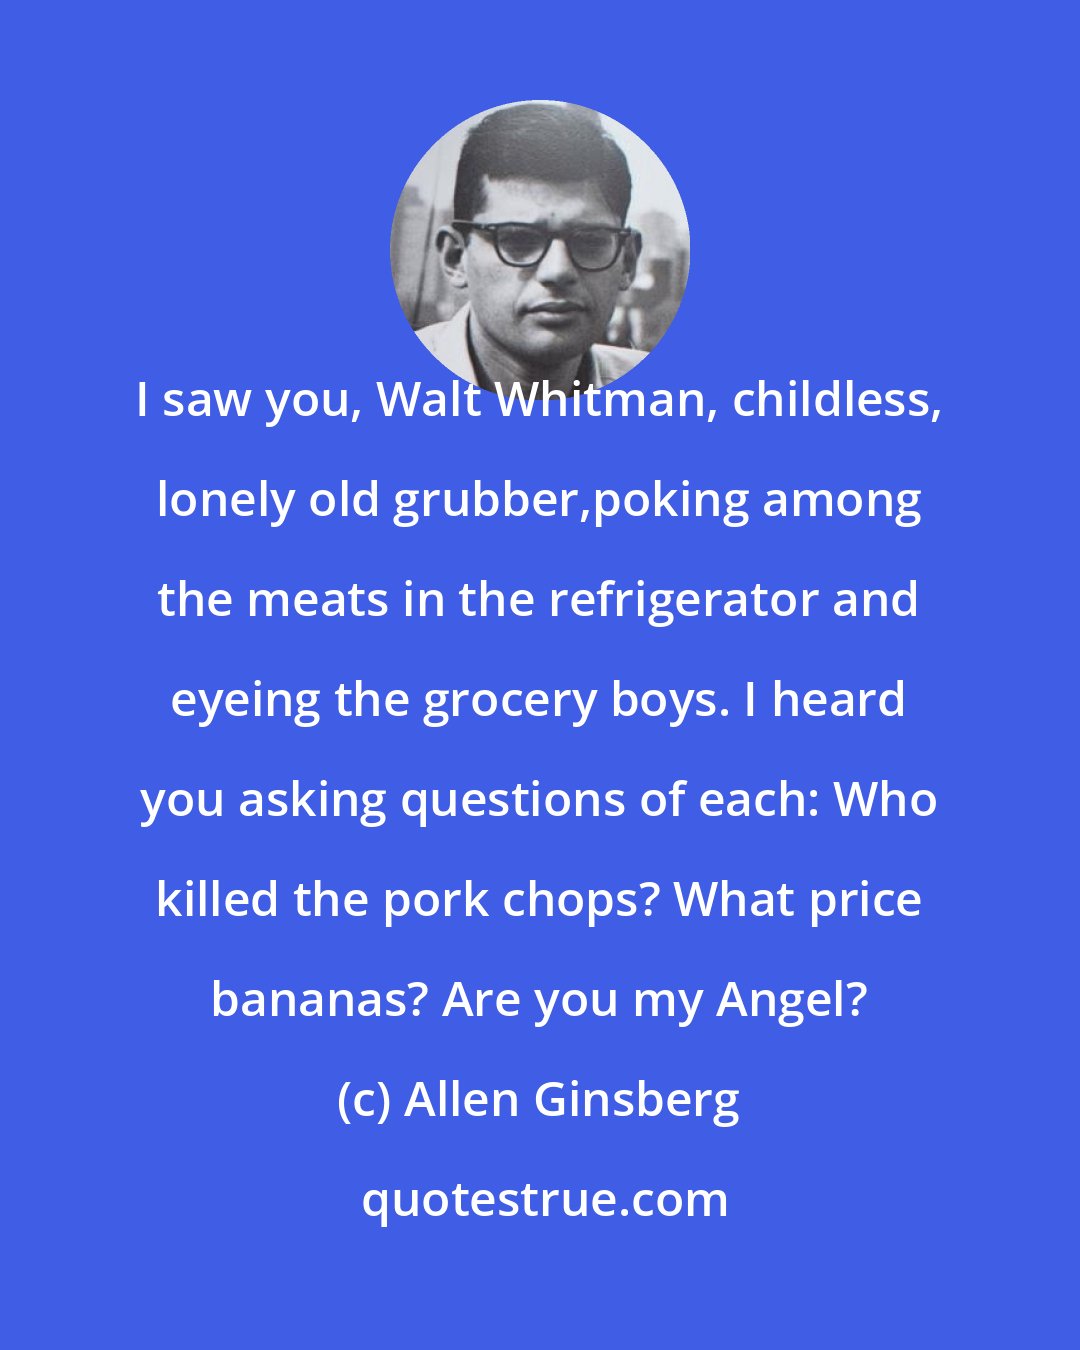 Allen Ginsberg: I saw you, Walt Whitman, childless, lonely old grubber,poking among the meats in the refrigerator and eyeing the grocery boys. I heard you asking questions of each: Who killed the pork chops? What price bananas? Are you my Angel?